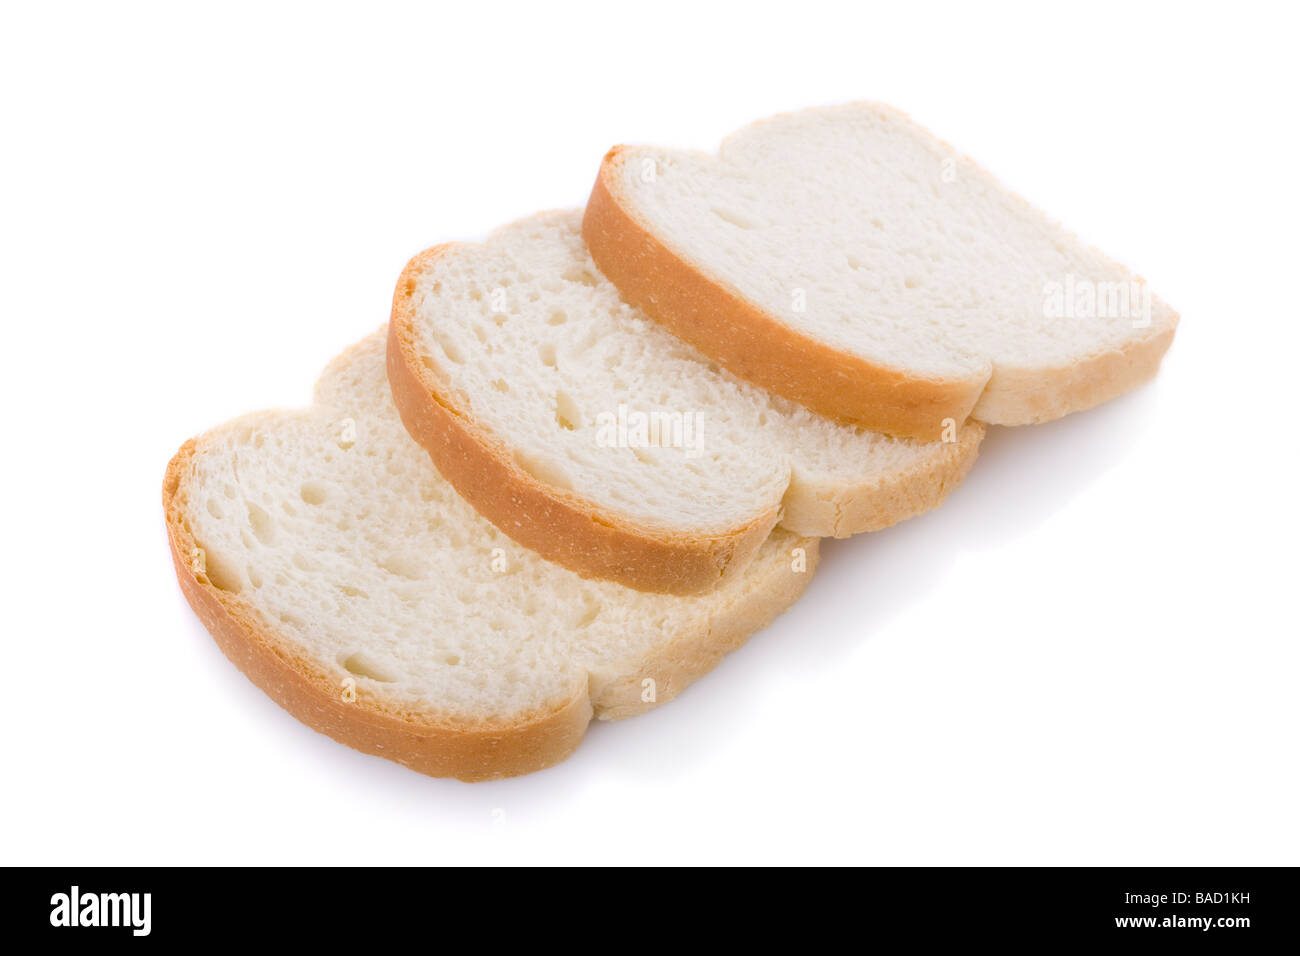 Three bread slices isolated on white background Stock Photo